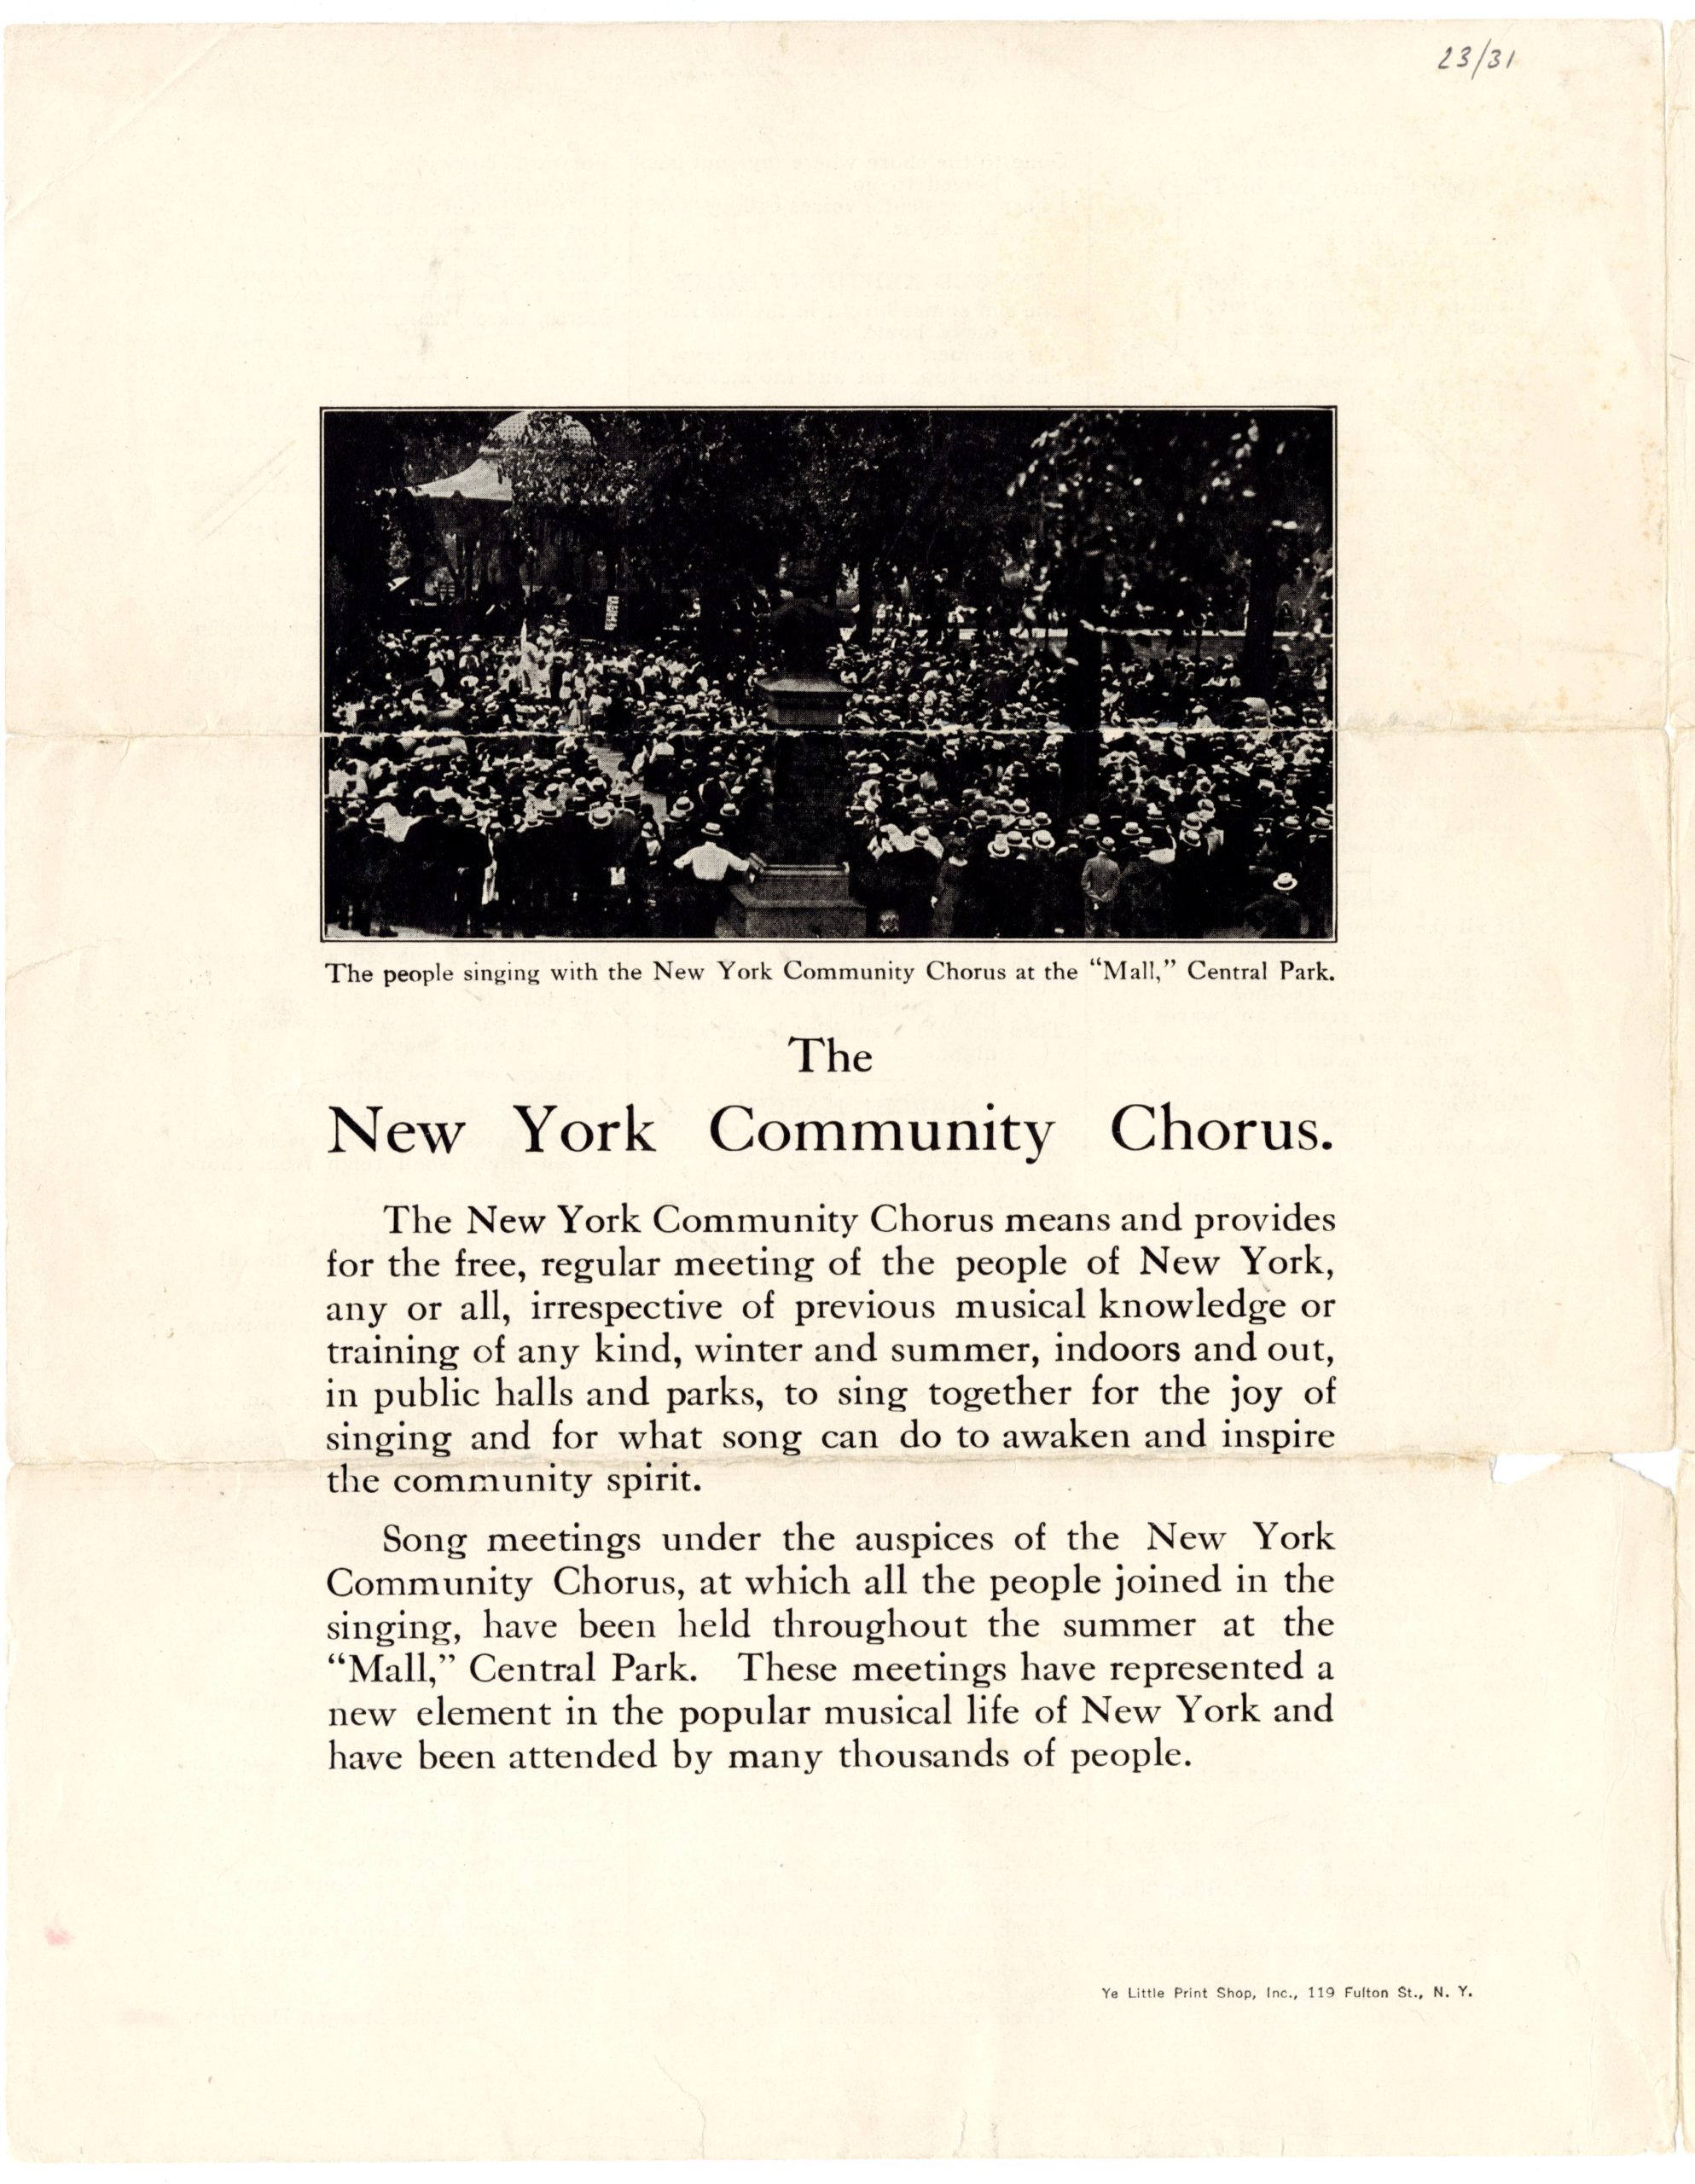 Back cover of festival program, with information about the New York Community Chorus..